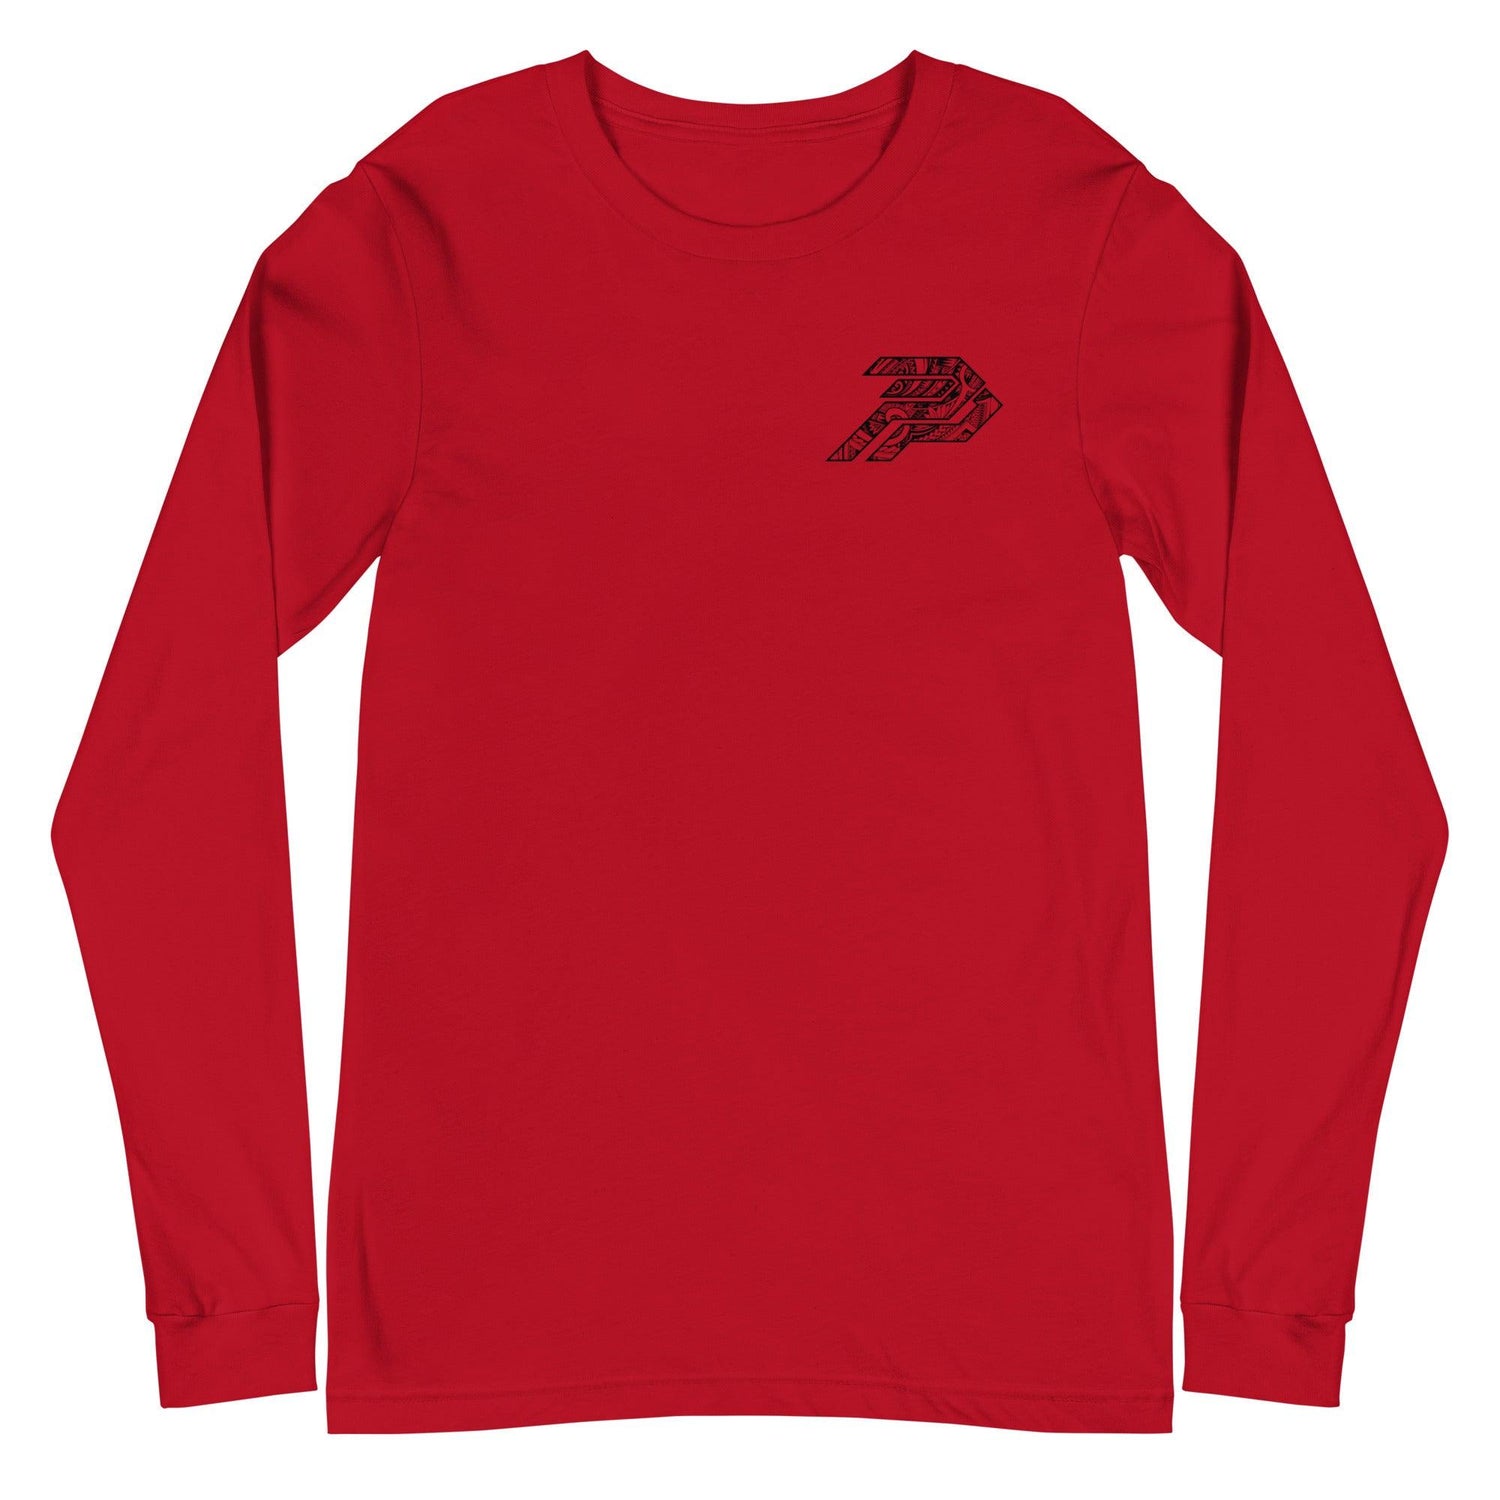 Phill Paea "Homegrown" Long Sleeve Tee - Fan Arch